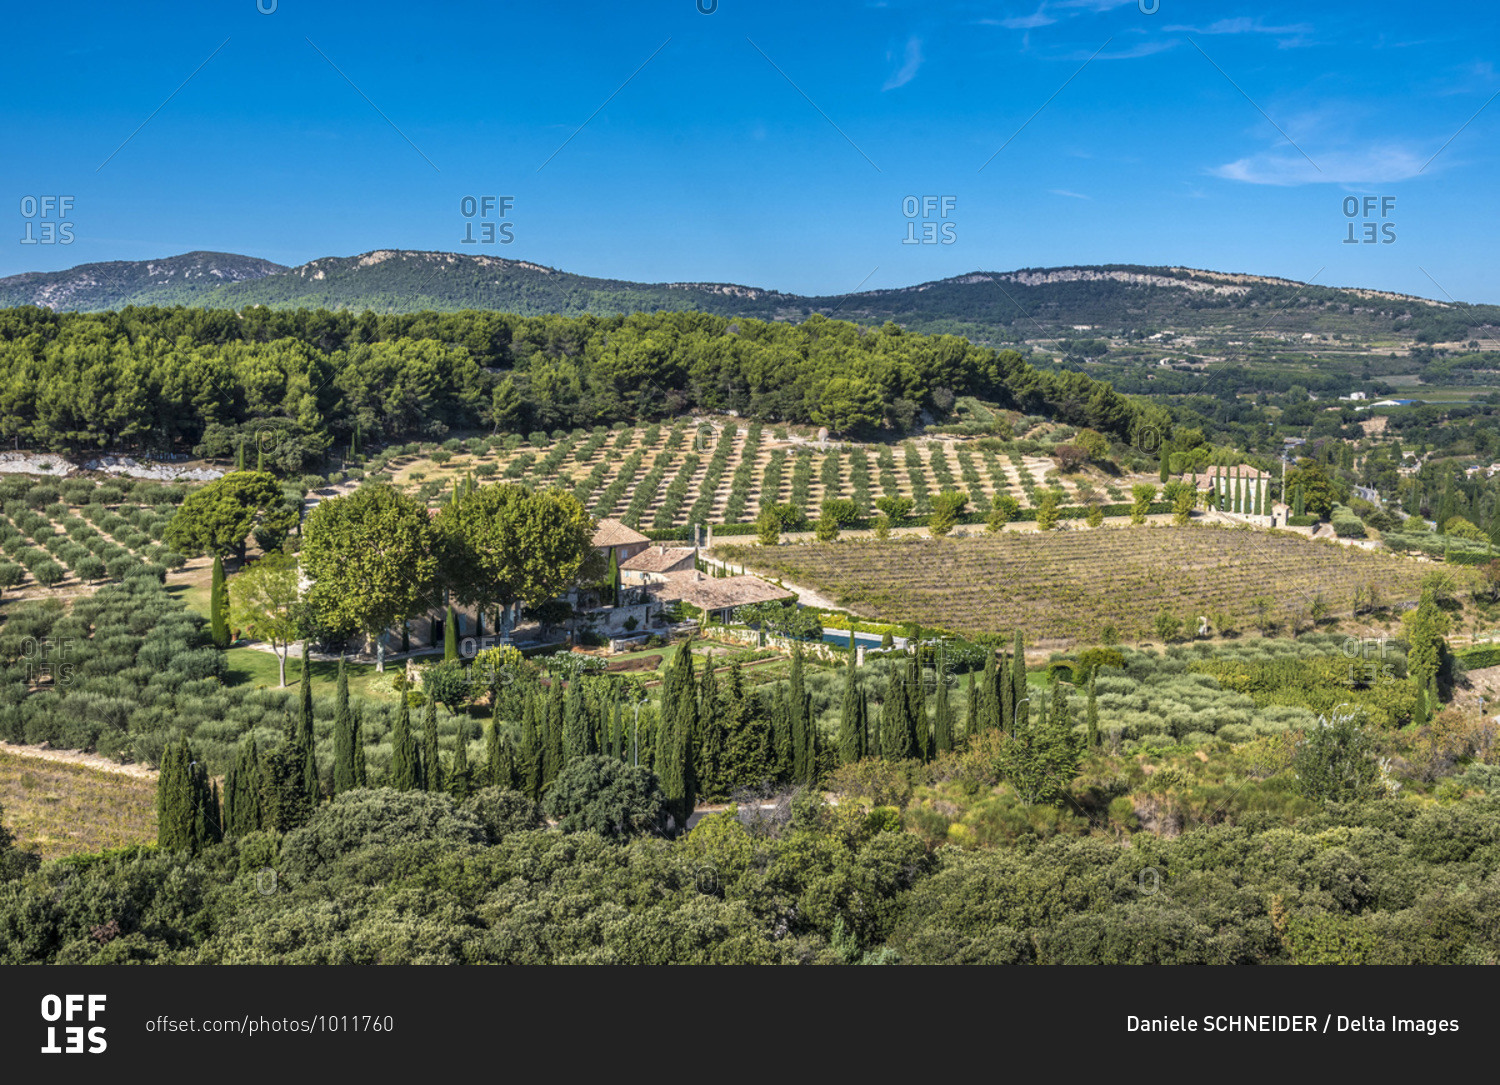 France, Provence, Vaucluse, Le Barroux, rural landscape with olive trees and vines